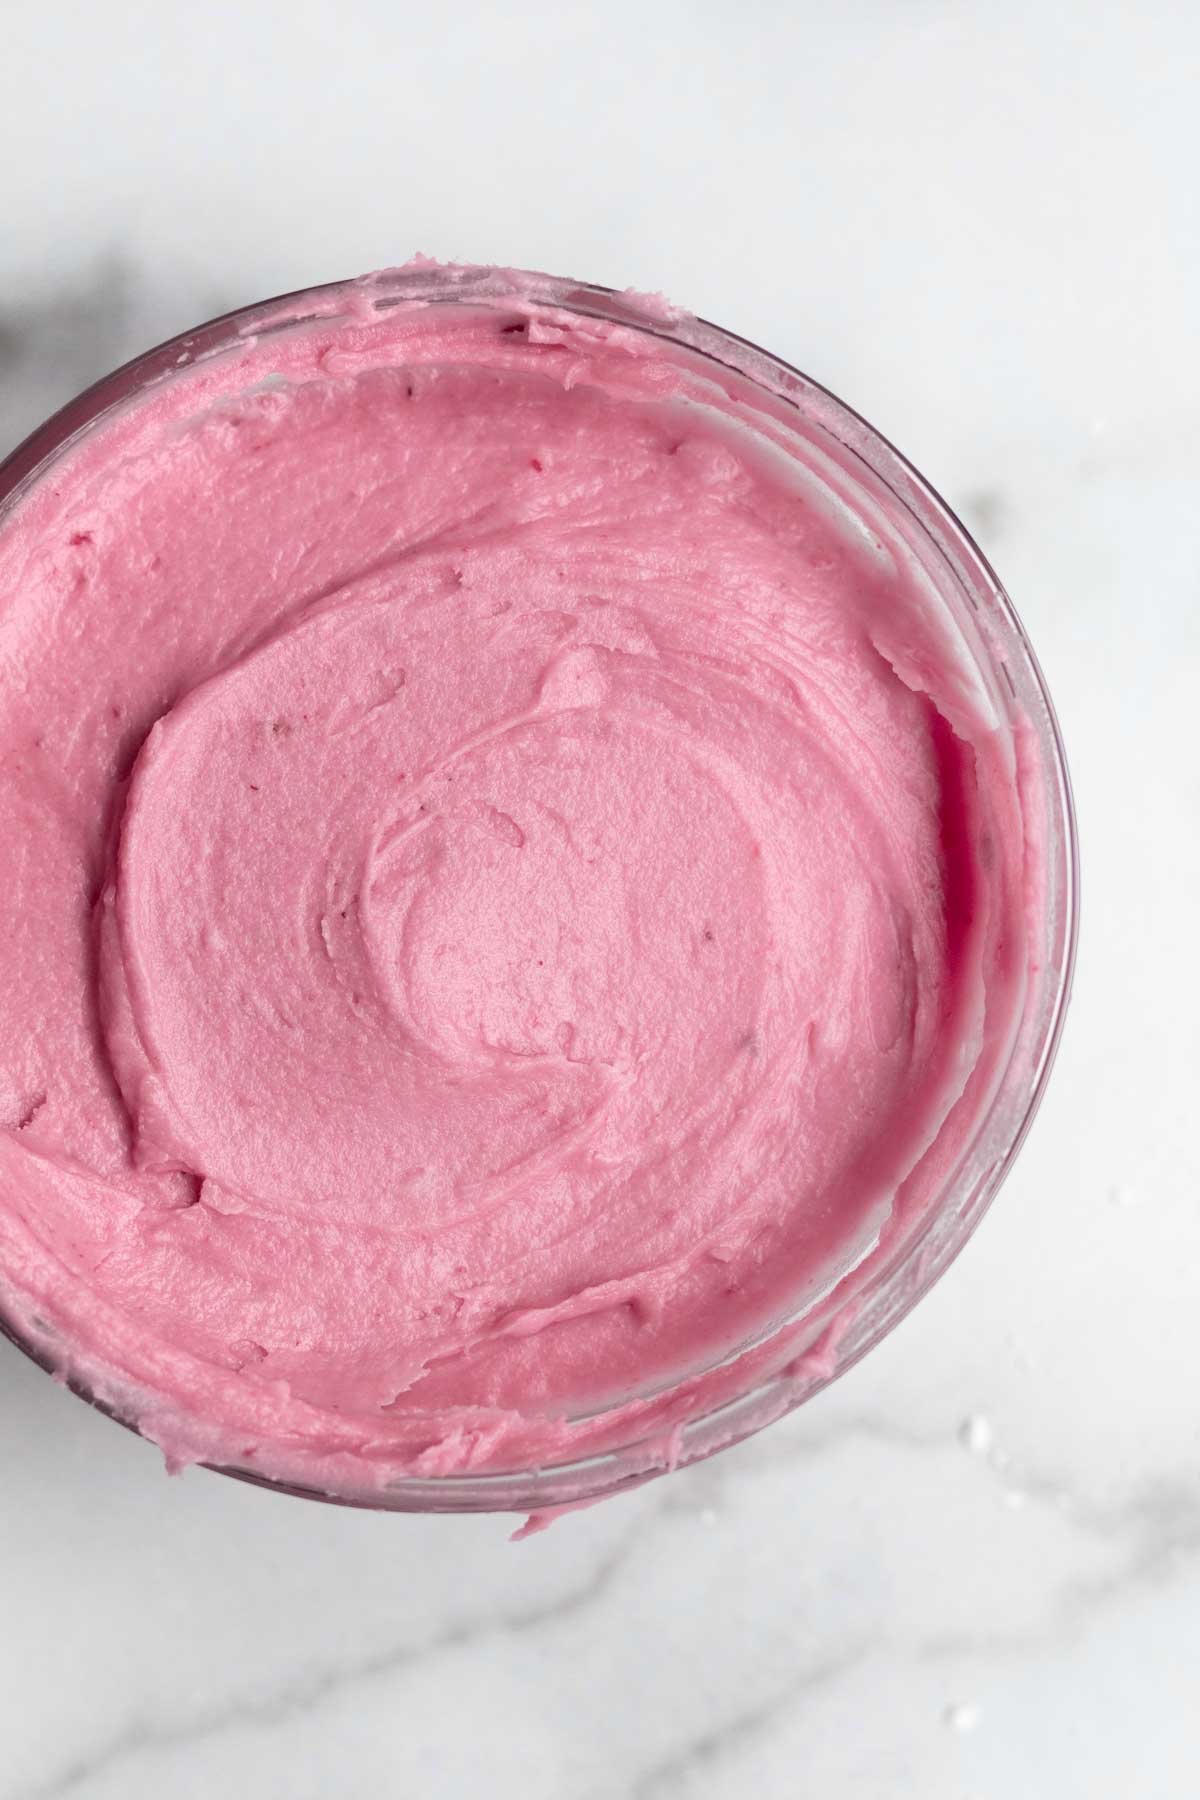 The pink and creamy blackberry frosting fills a glass bowl.